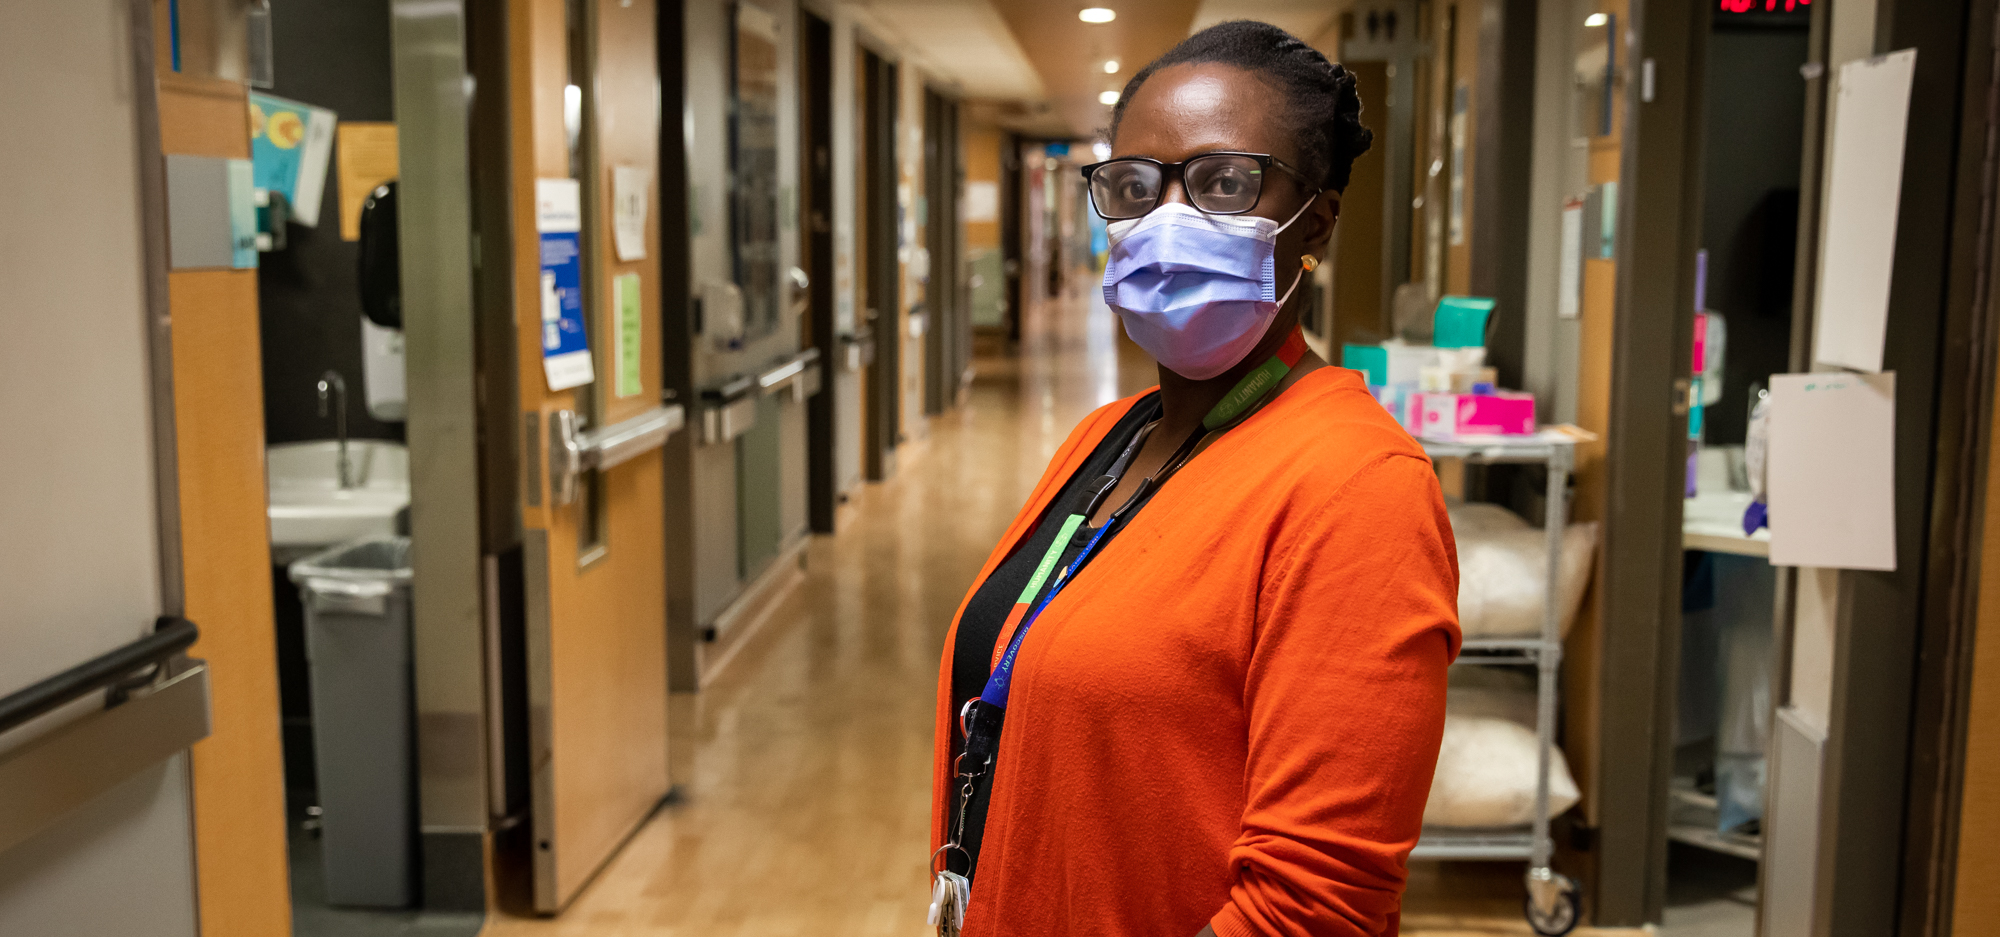 Nana Asomaning, a patient care manager at Mount Sinai Hospital, stands in the hall way of the unit where she works. She is looking at the camera and wearing a medical grade procedure maskl procedure mask.